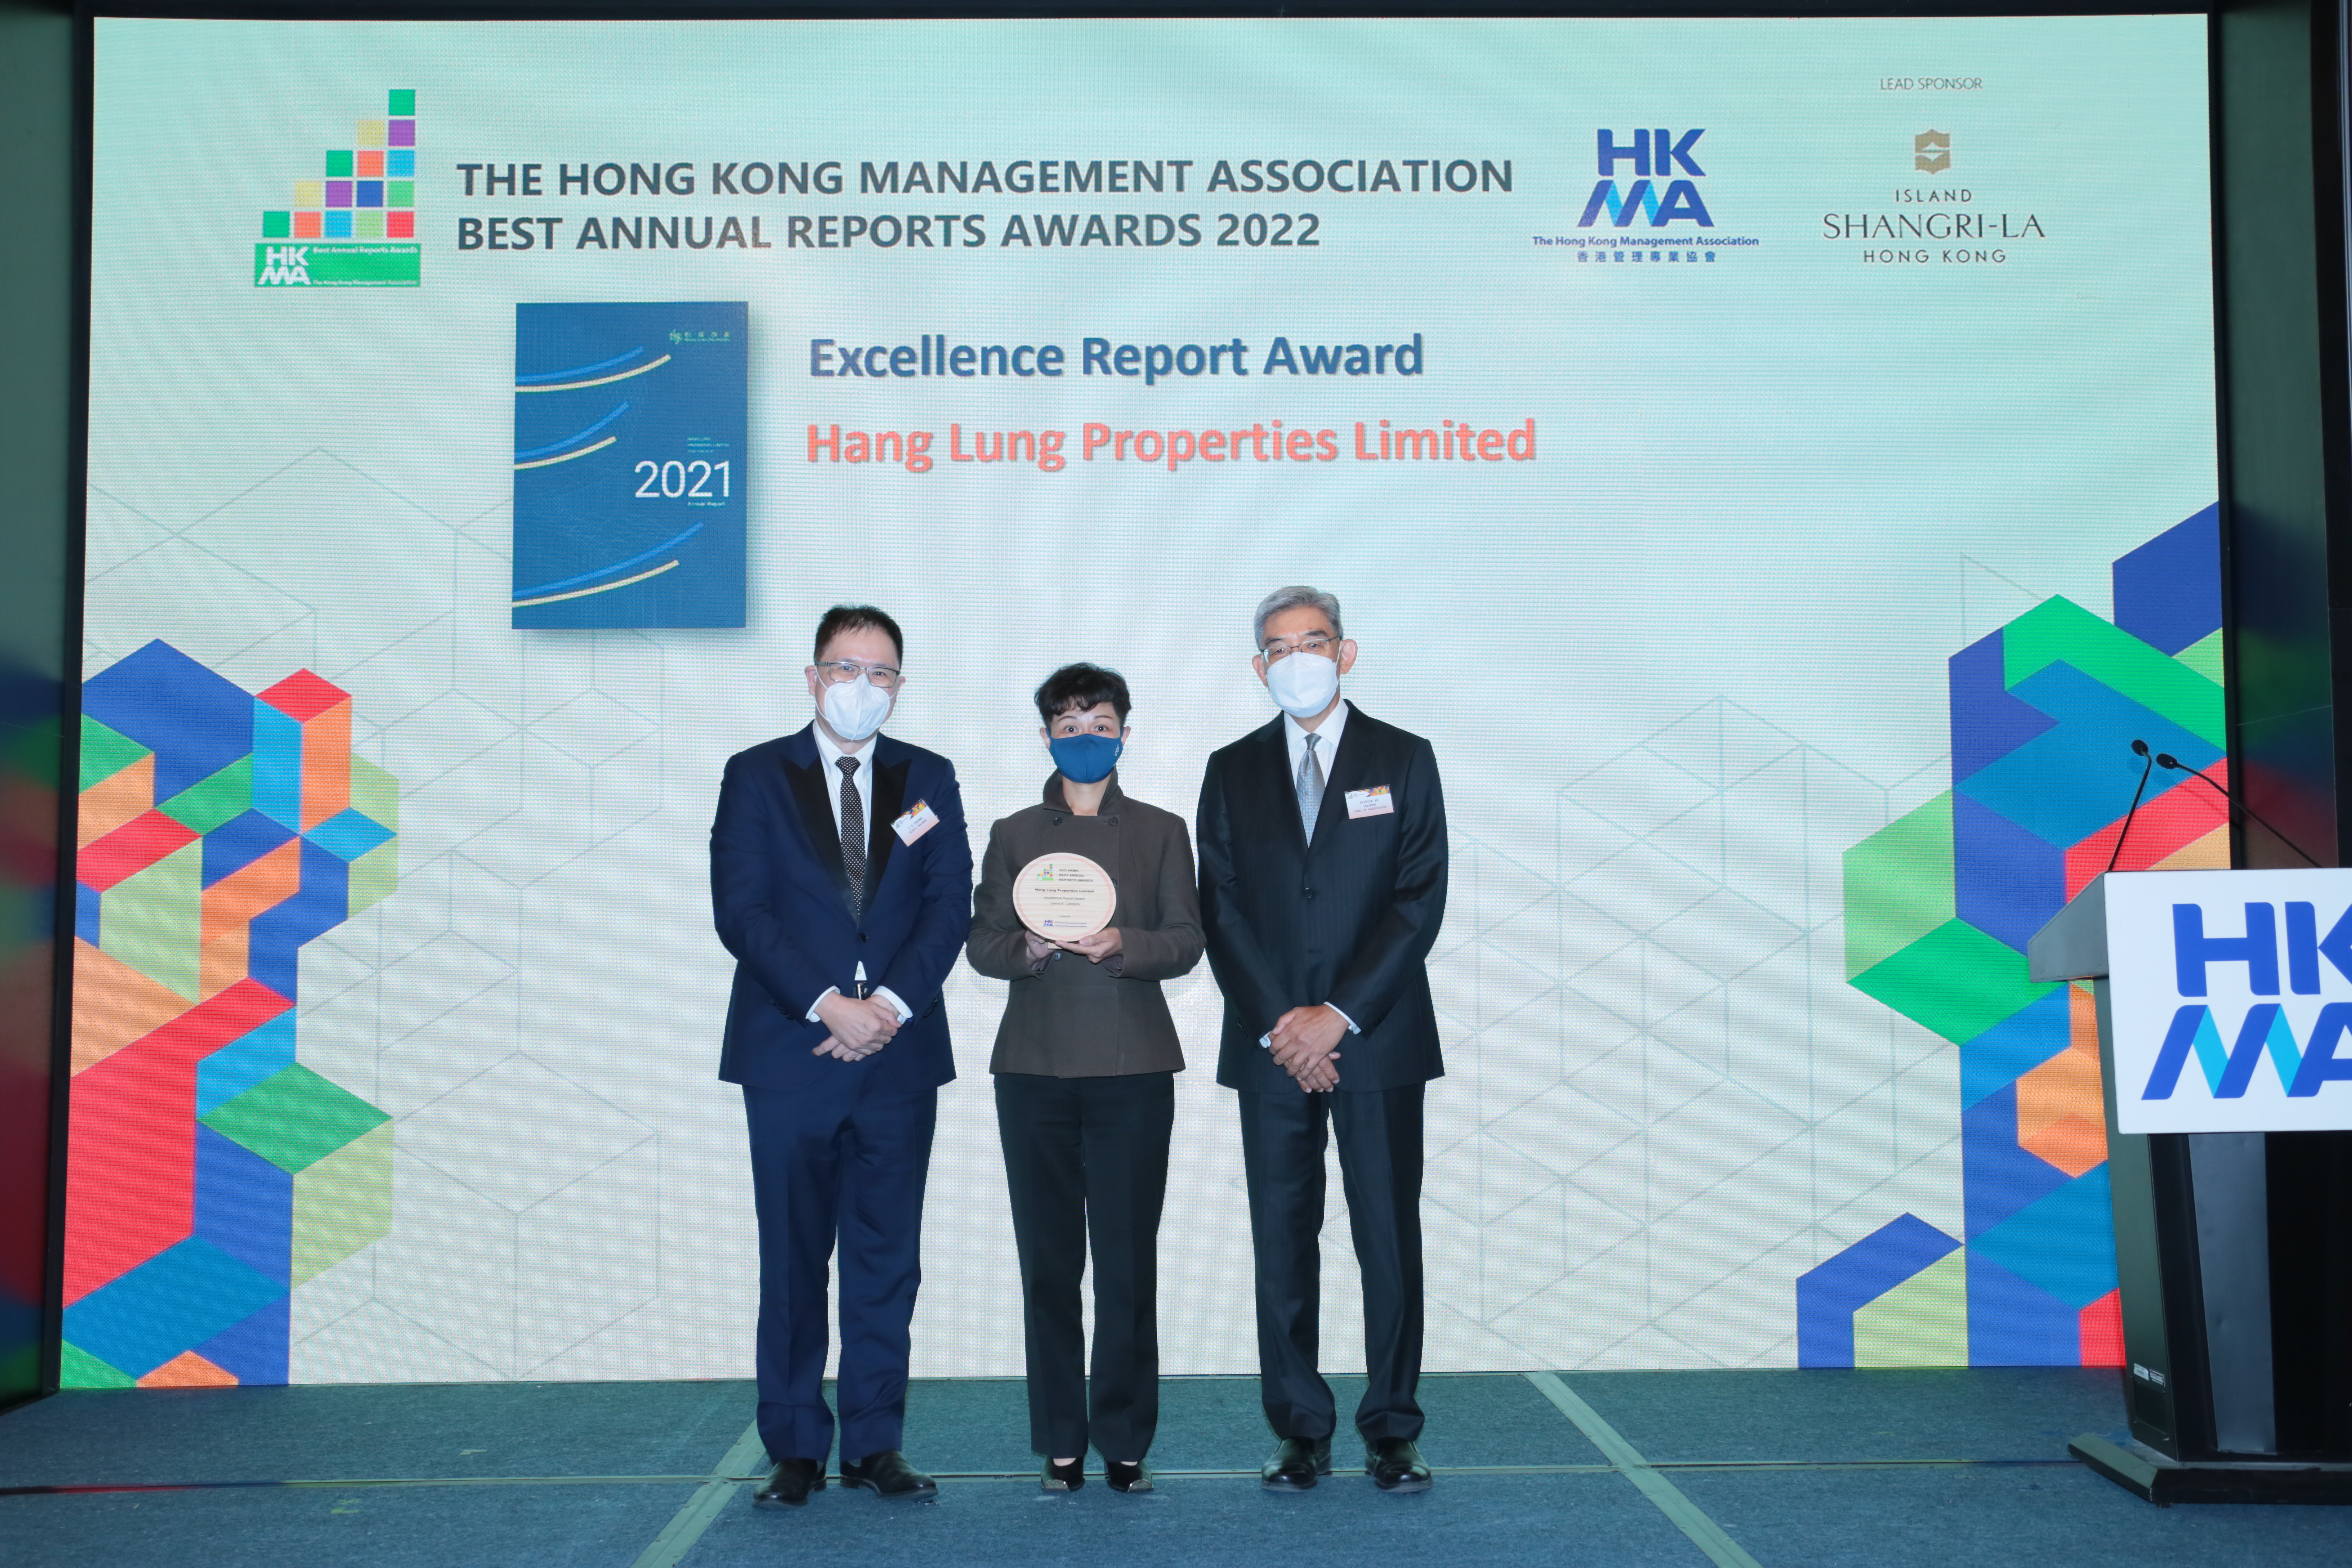 Hang Lung garners the Excellence Report Award at the 2022 HKMA Best Annual Reports Awards